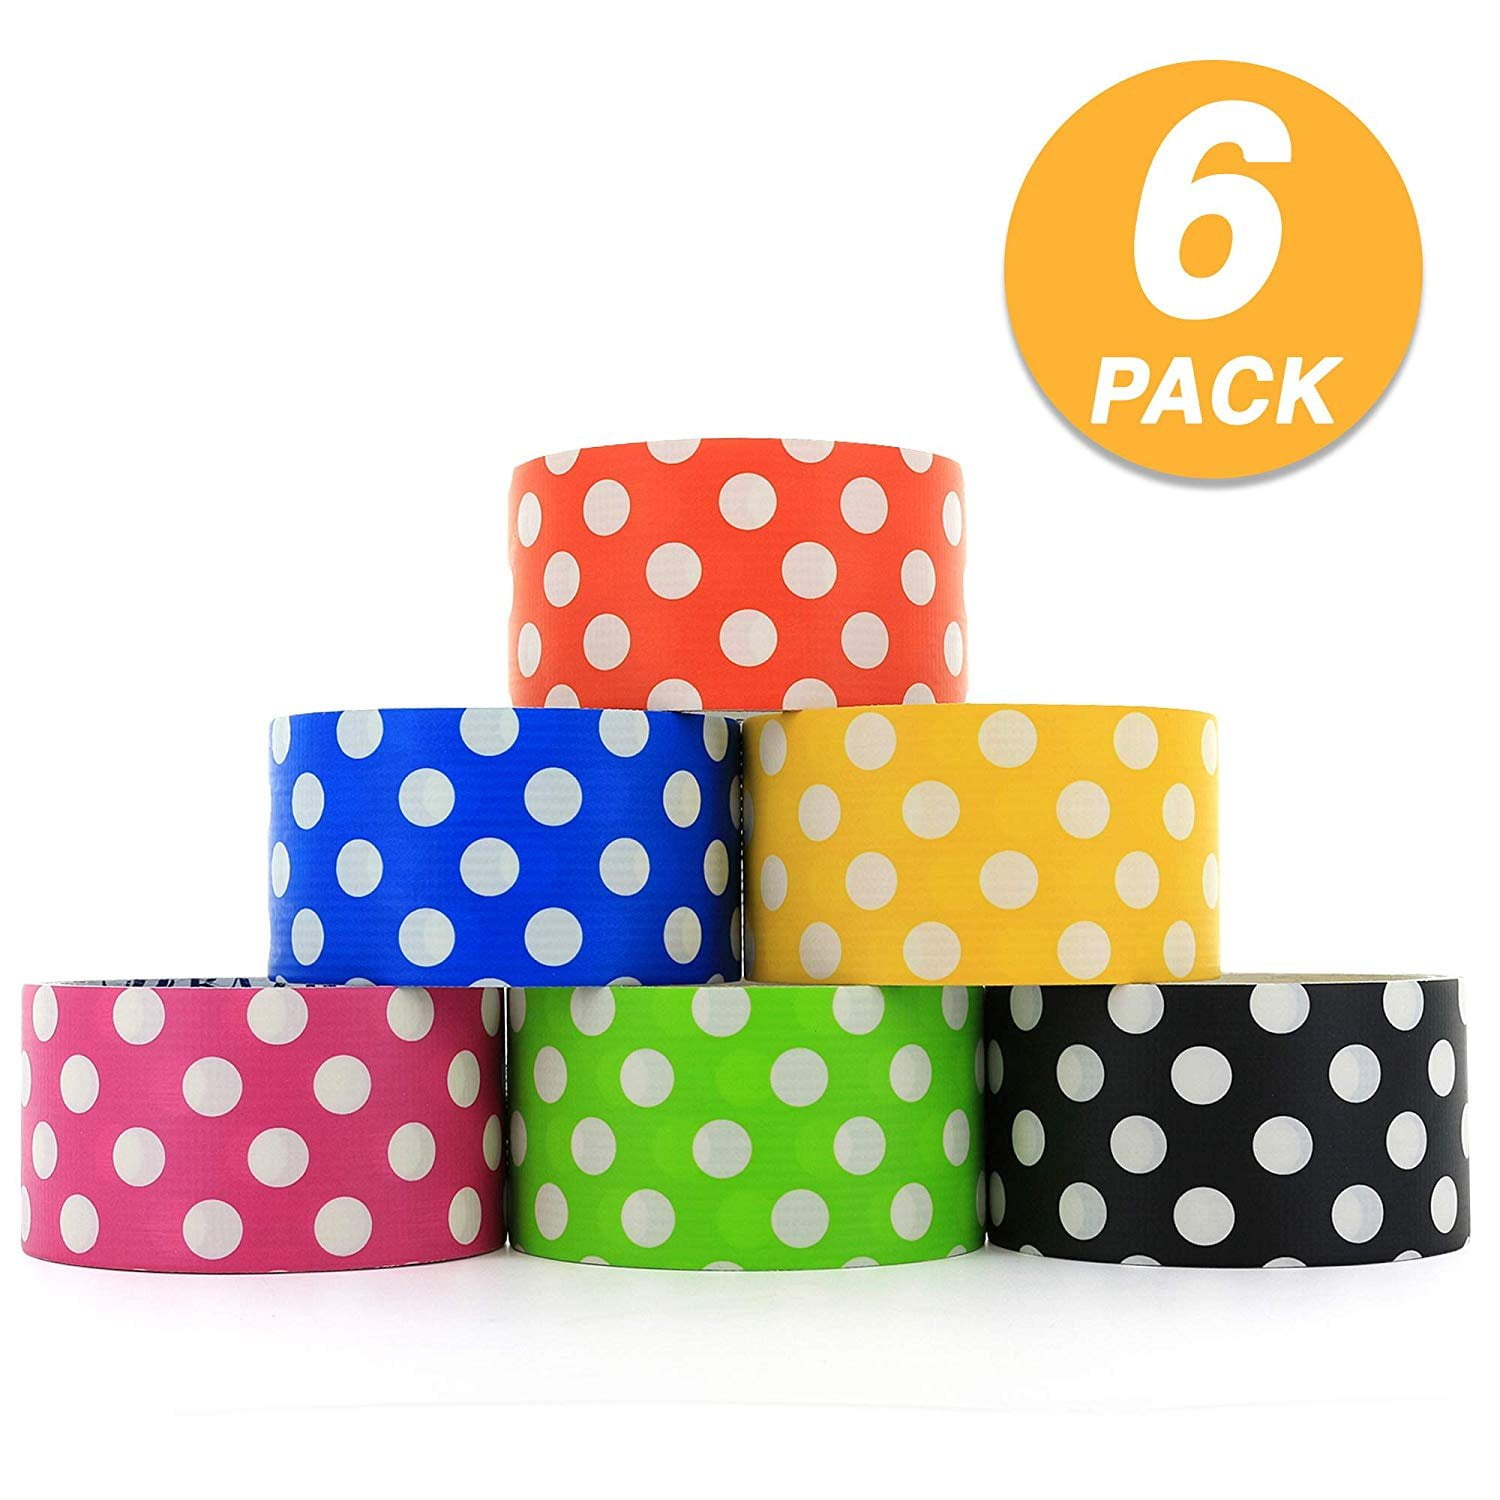 6 rolls 2 Inch 80yds 6 Colored Packing Tape  (White,Orange,Yellow,Green,Red,Blue) - Helia Beer Co